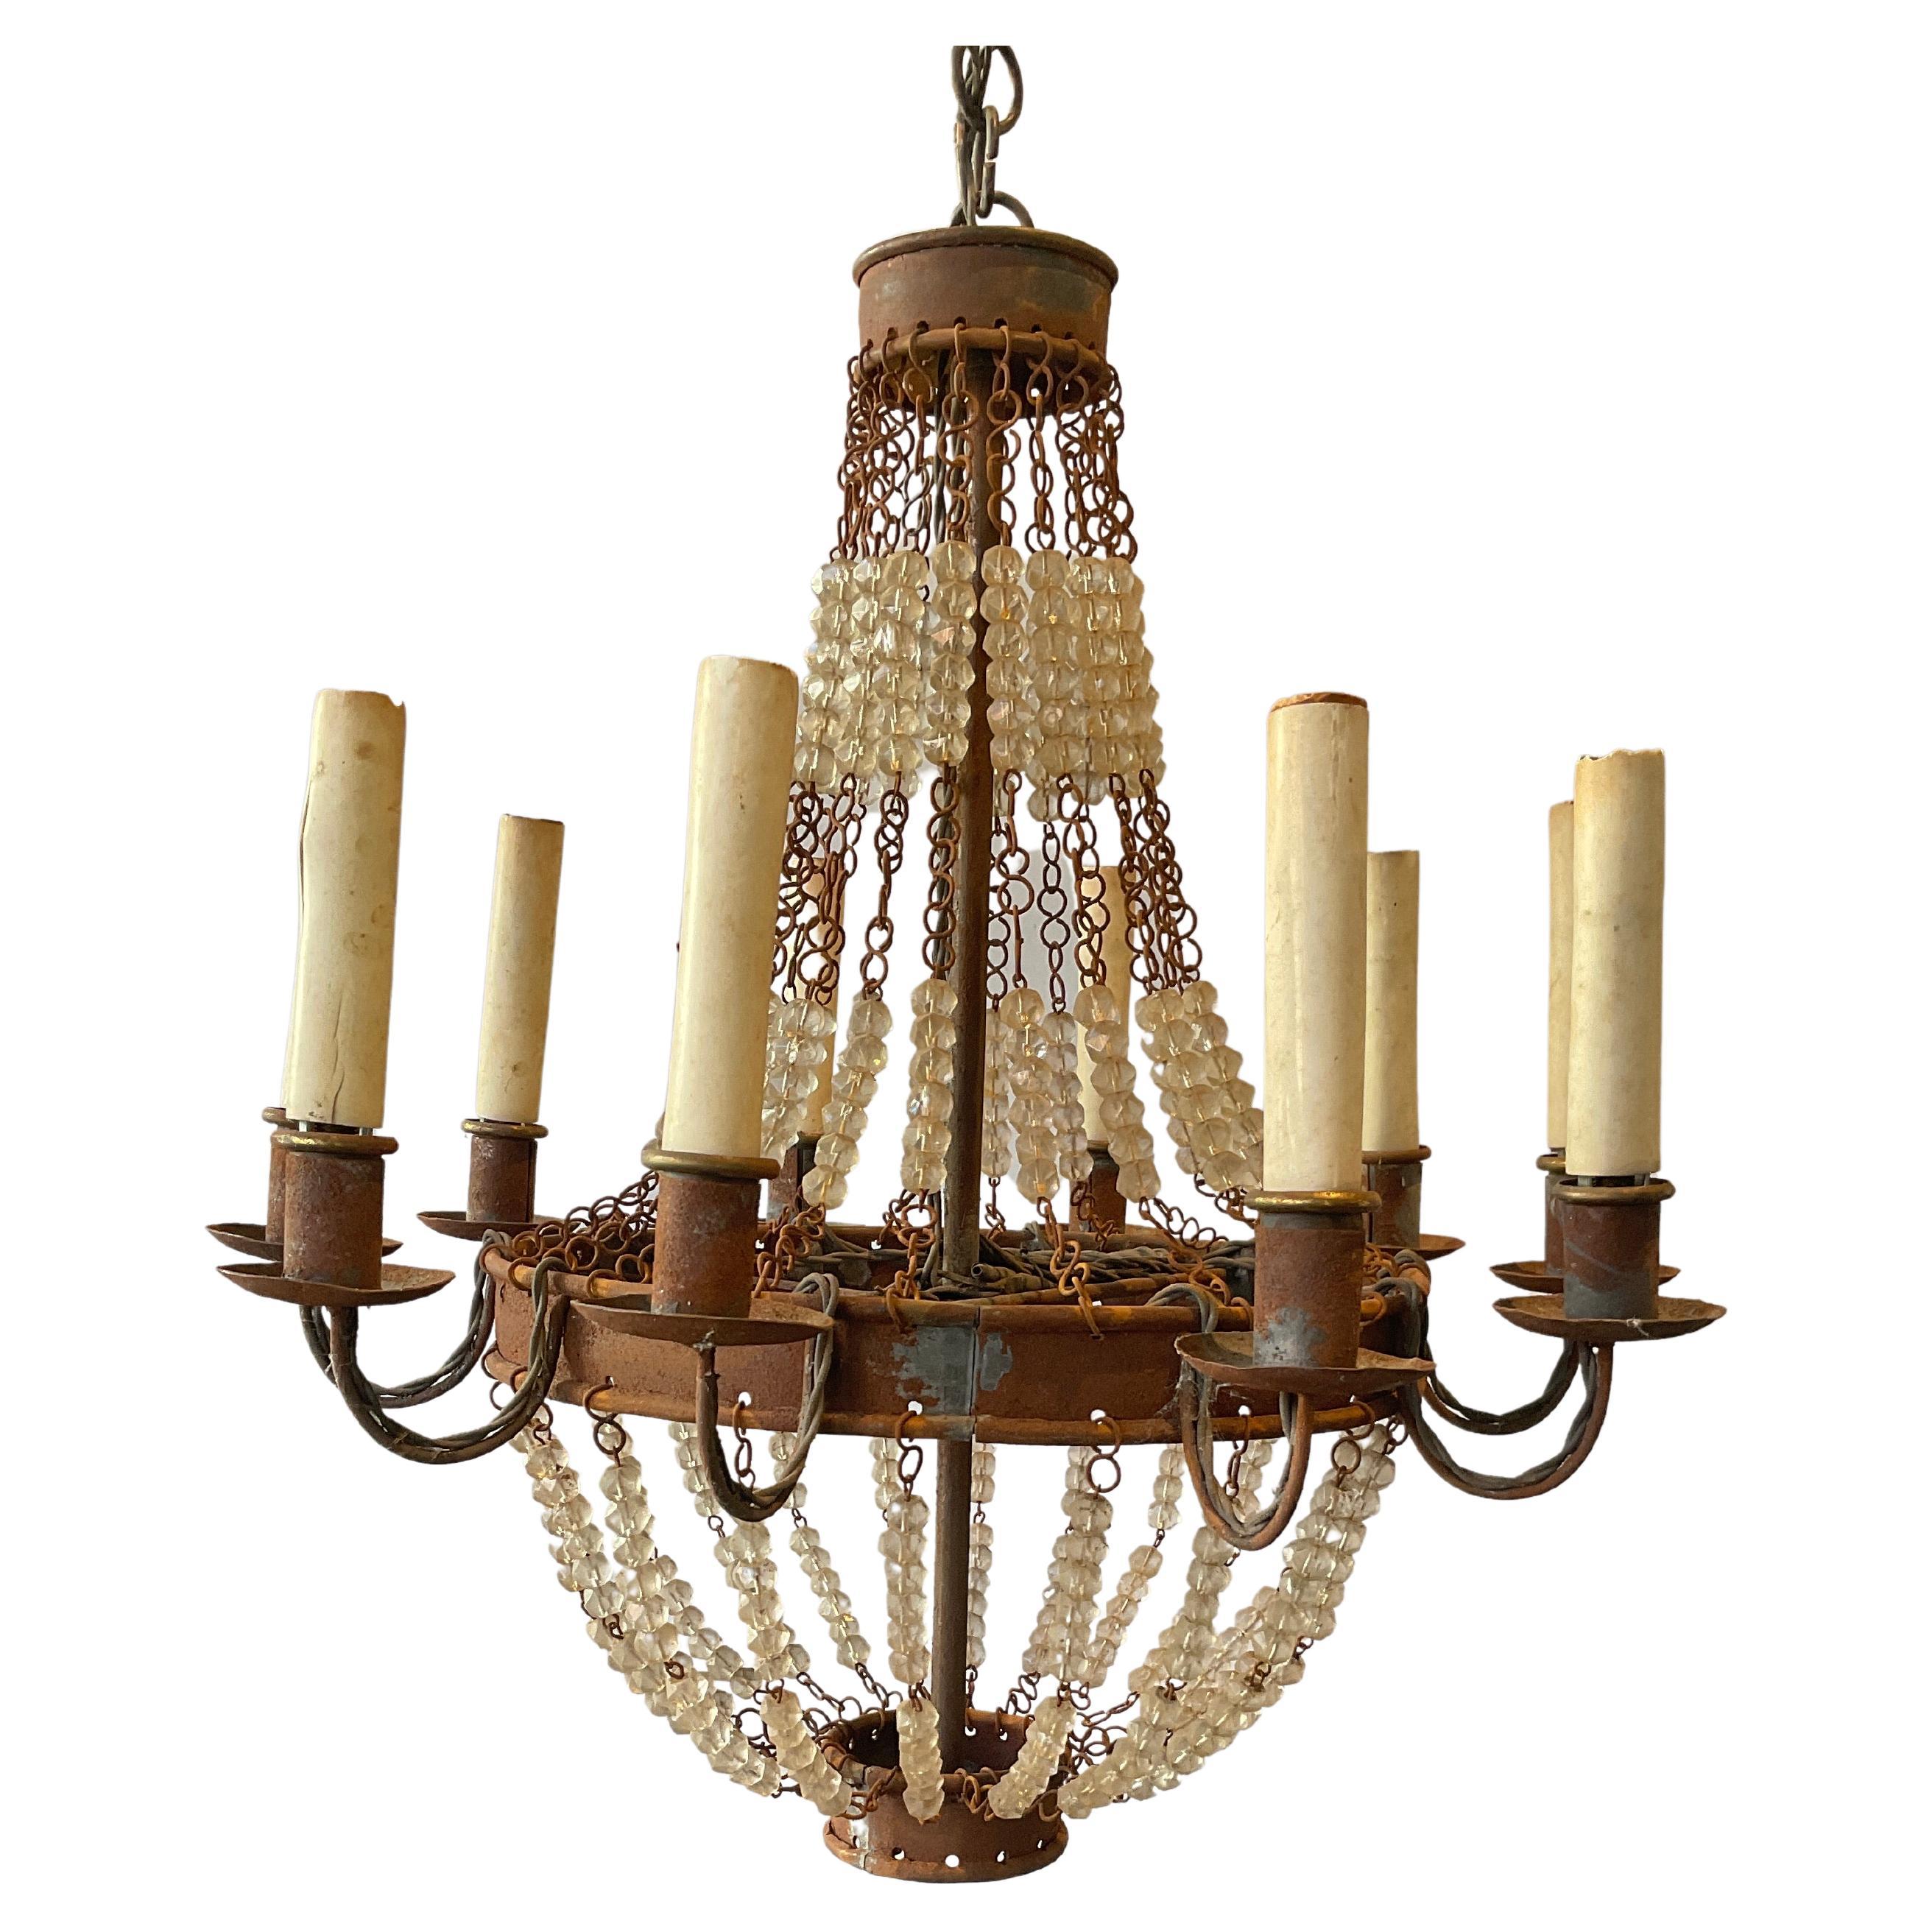 https://a.1stdibscdn.com/1970s-french-style-beaded-rusted-metal-chandelier-for-sale/f_10782/f_325254021675192903767/f_32525402_1675192904997_bg_processed.jpg